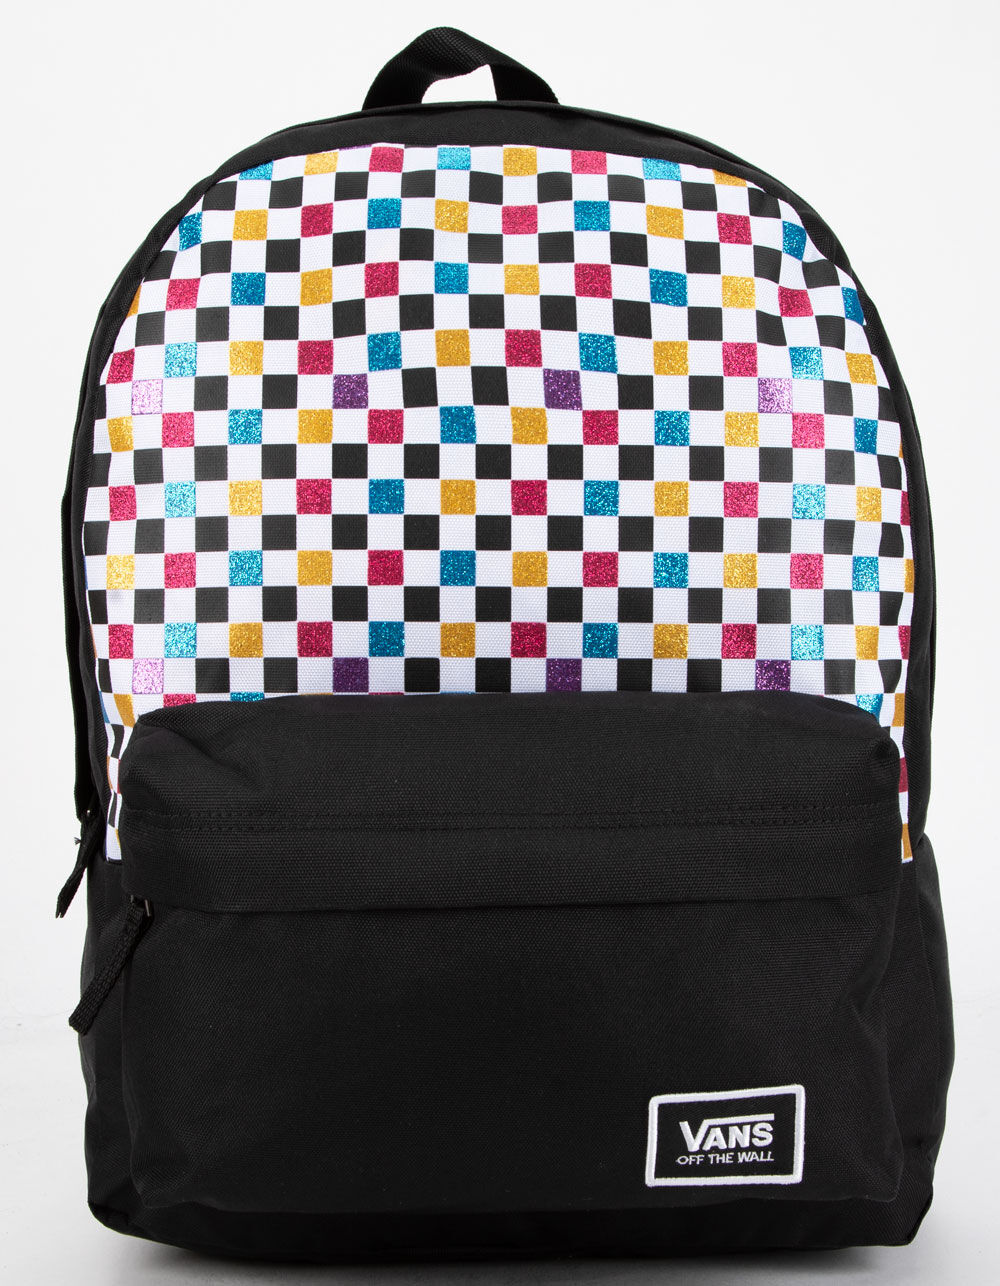 VANS Realm Classic Camo Backpack image number 0